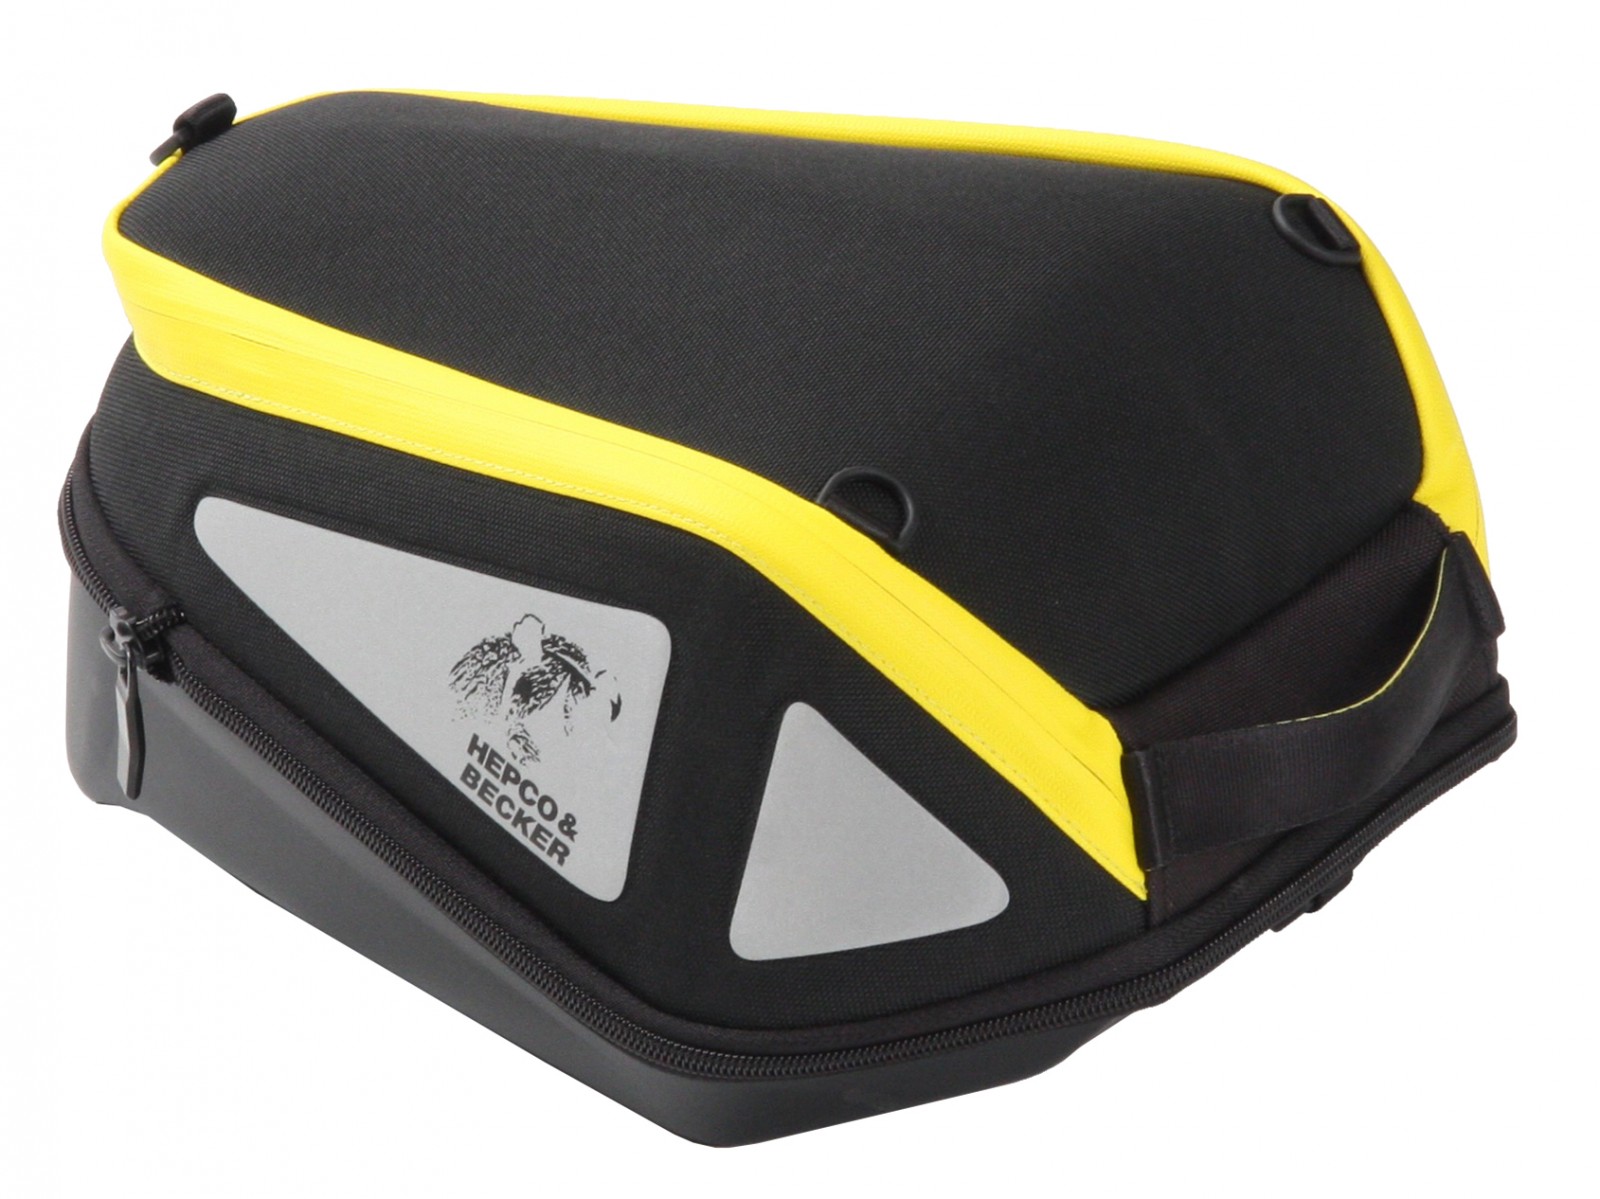 Image of Hepco & Becker Tankbag Royster 5-8 L Black Yellow Size ID 4042545642471